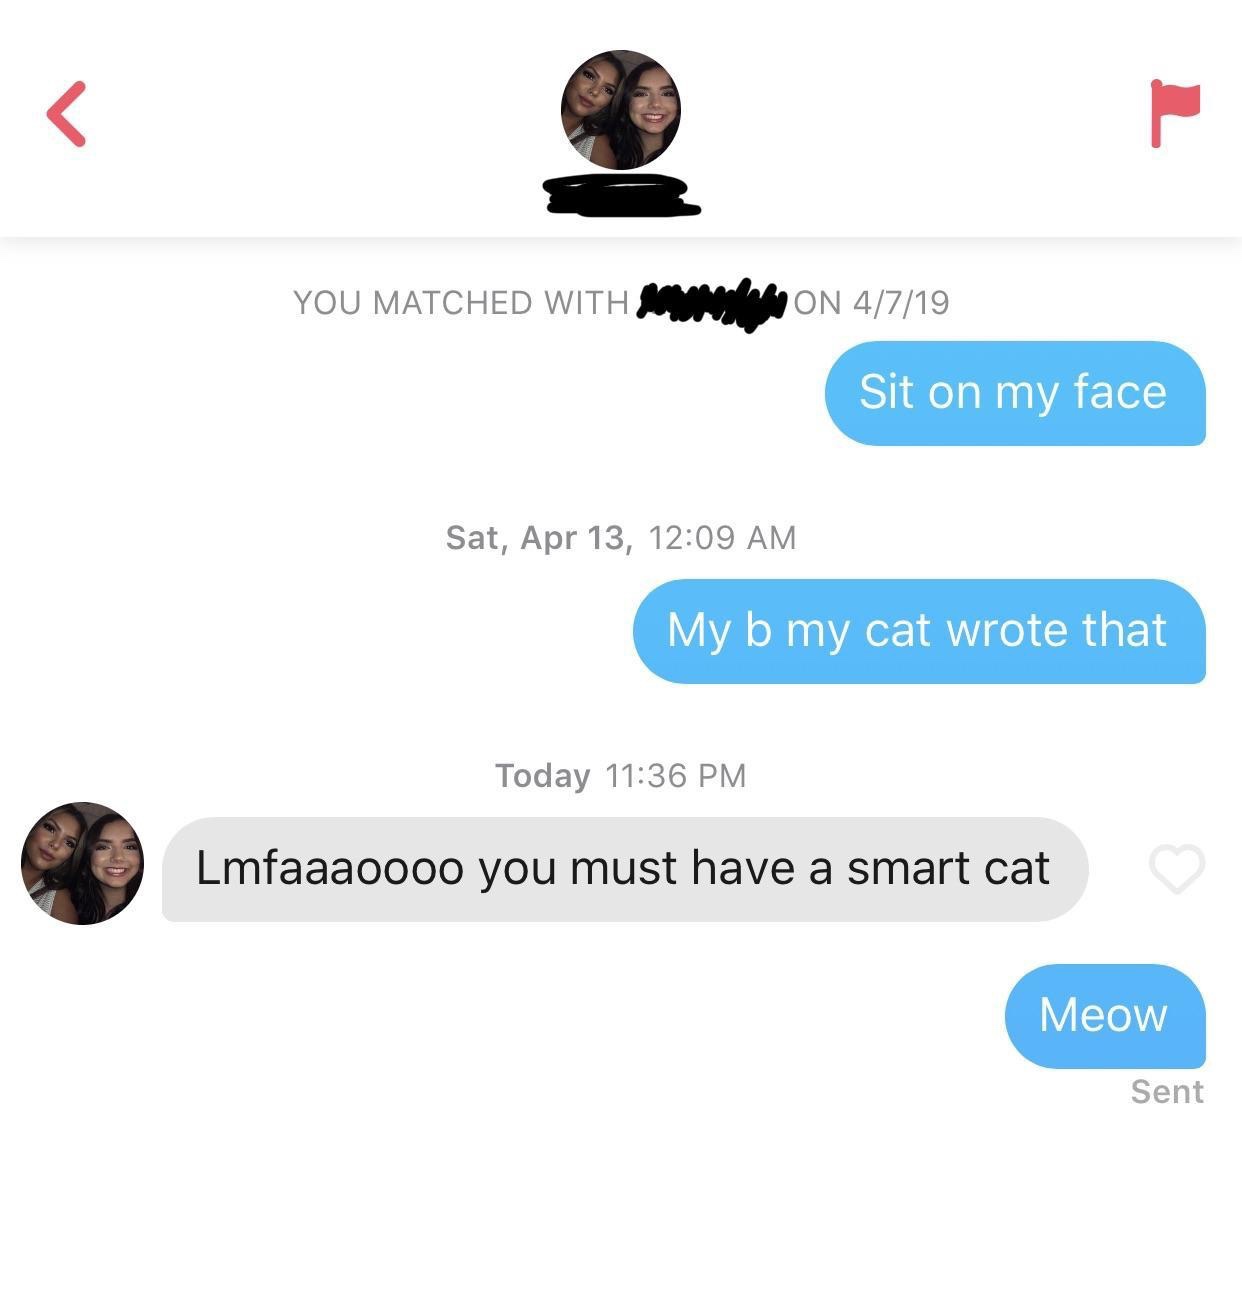 tinder - media - You Matched With M Oon 4719 Sit on my face Sat, Apr 13, My b my cat wrote that Today Lmfaaaoooo you must have a smart cat Meow Sent